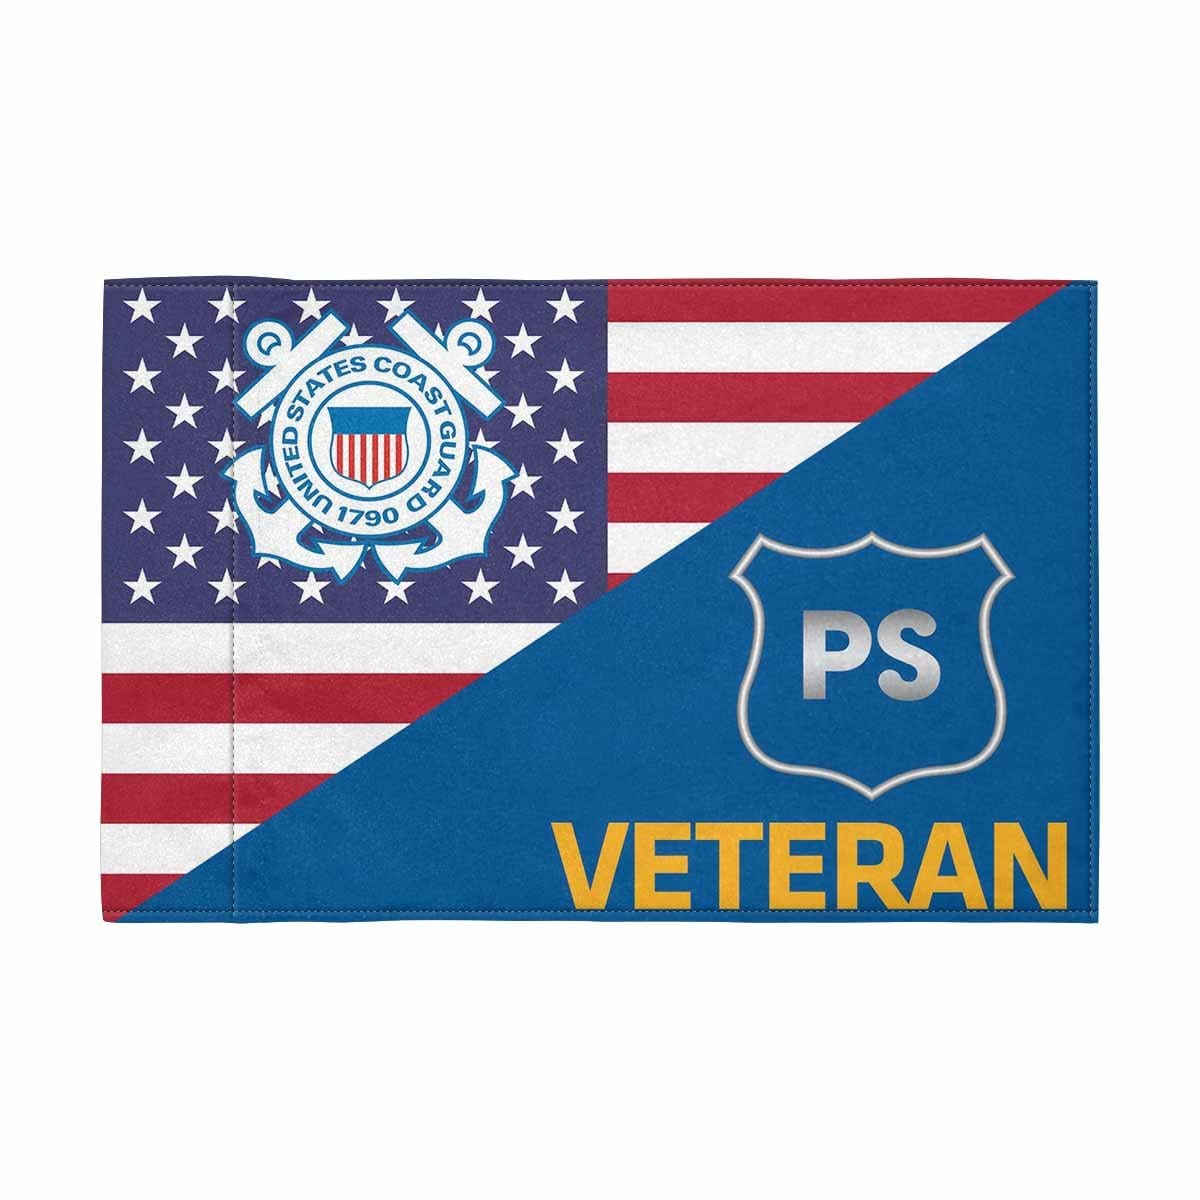 USCG PS Veteran Motorcycle Flag 9" x 6" Twin-Side Printing D01-MotorcycleFlag-USCG-Veterans Nation